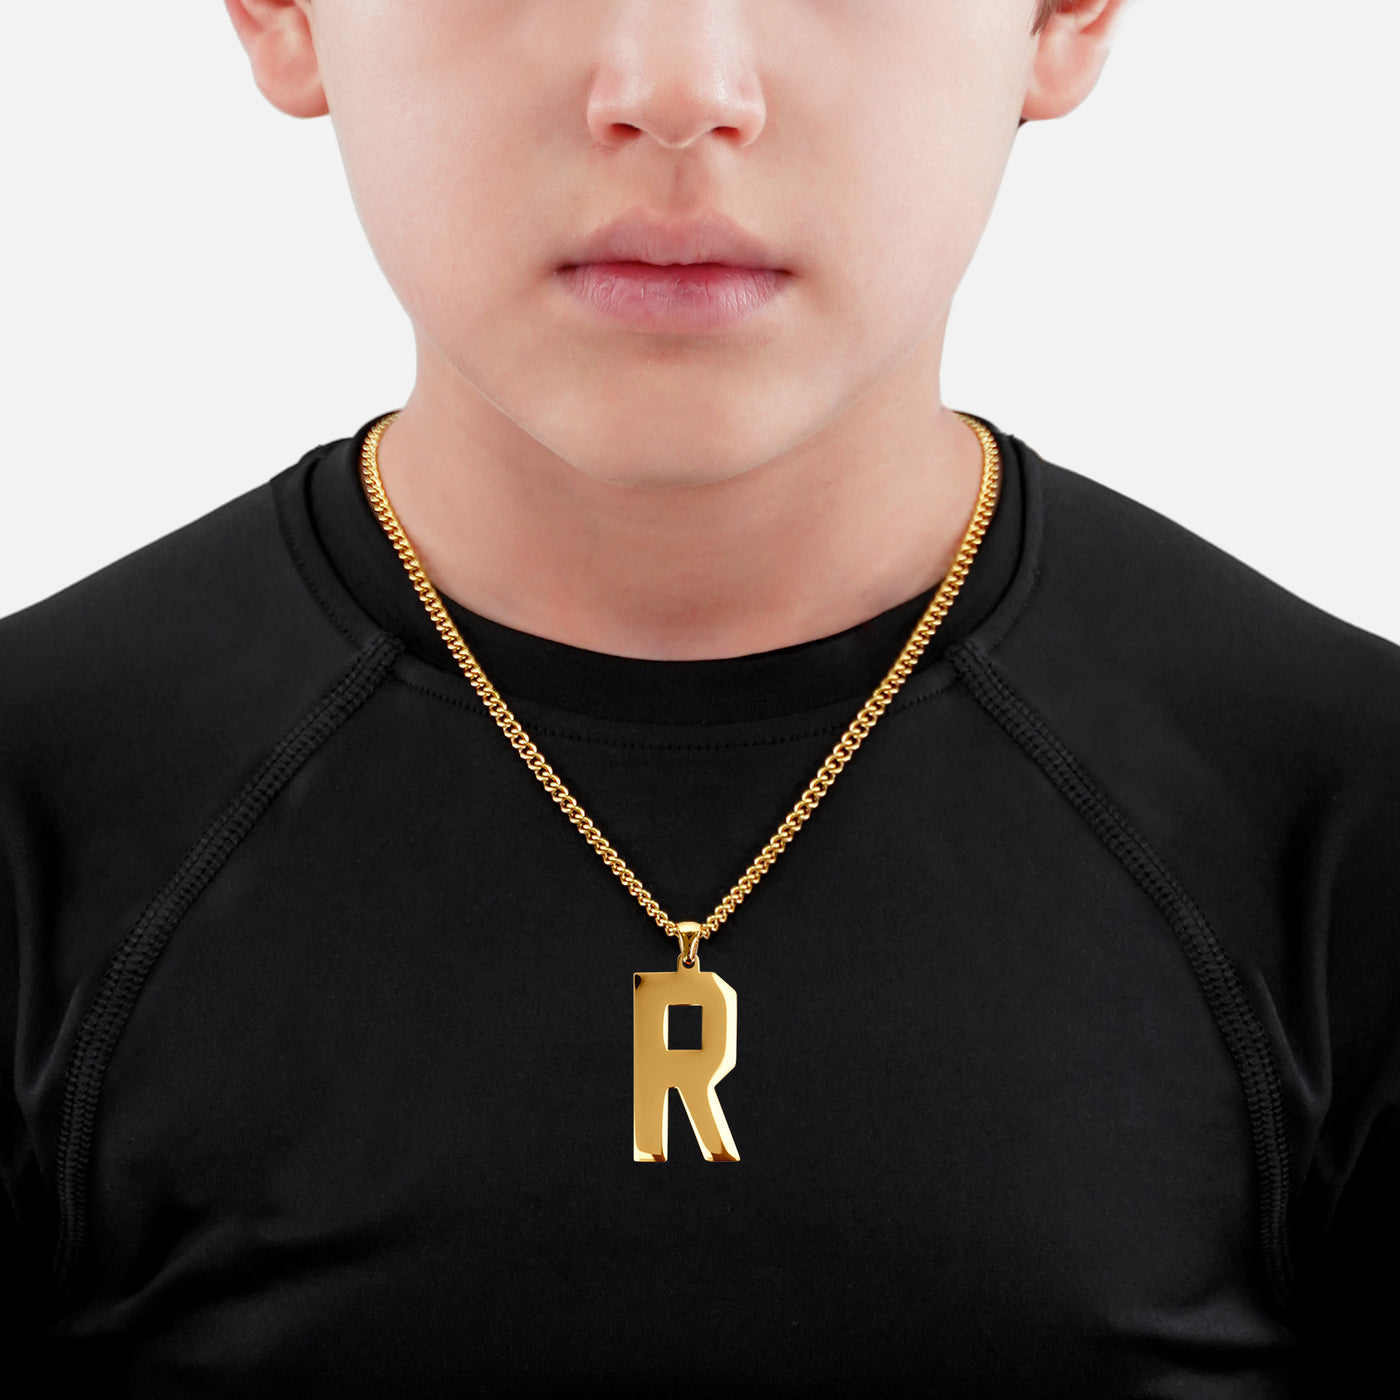 R Letter Pendant with Chain Kids Necklace - Gold Plated Stainless Steel